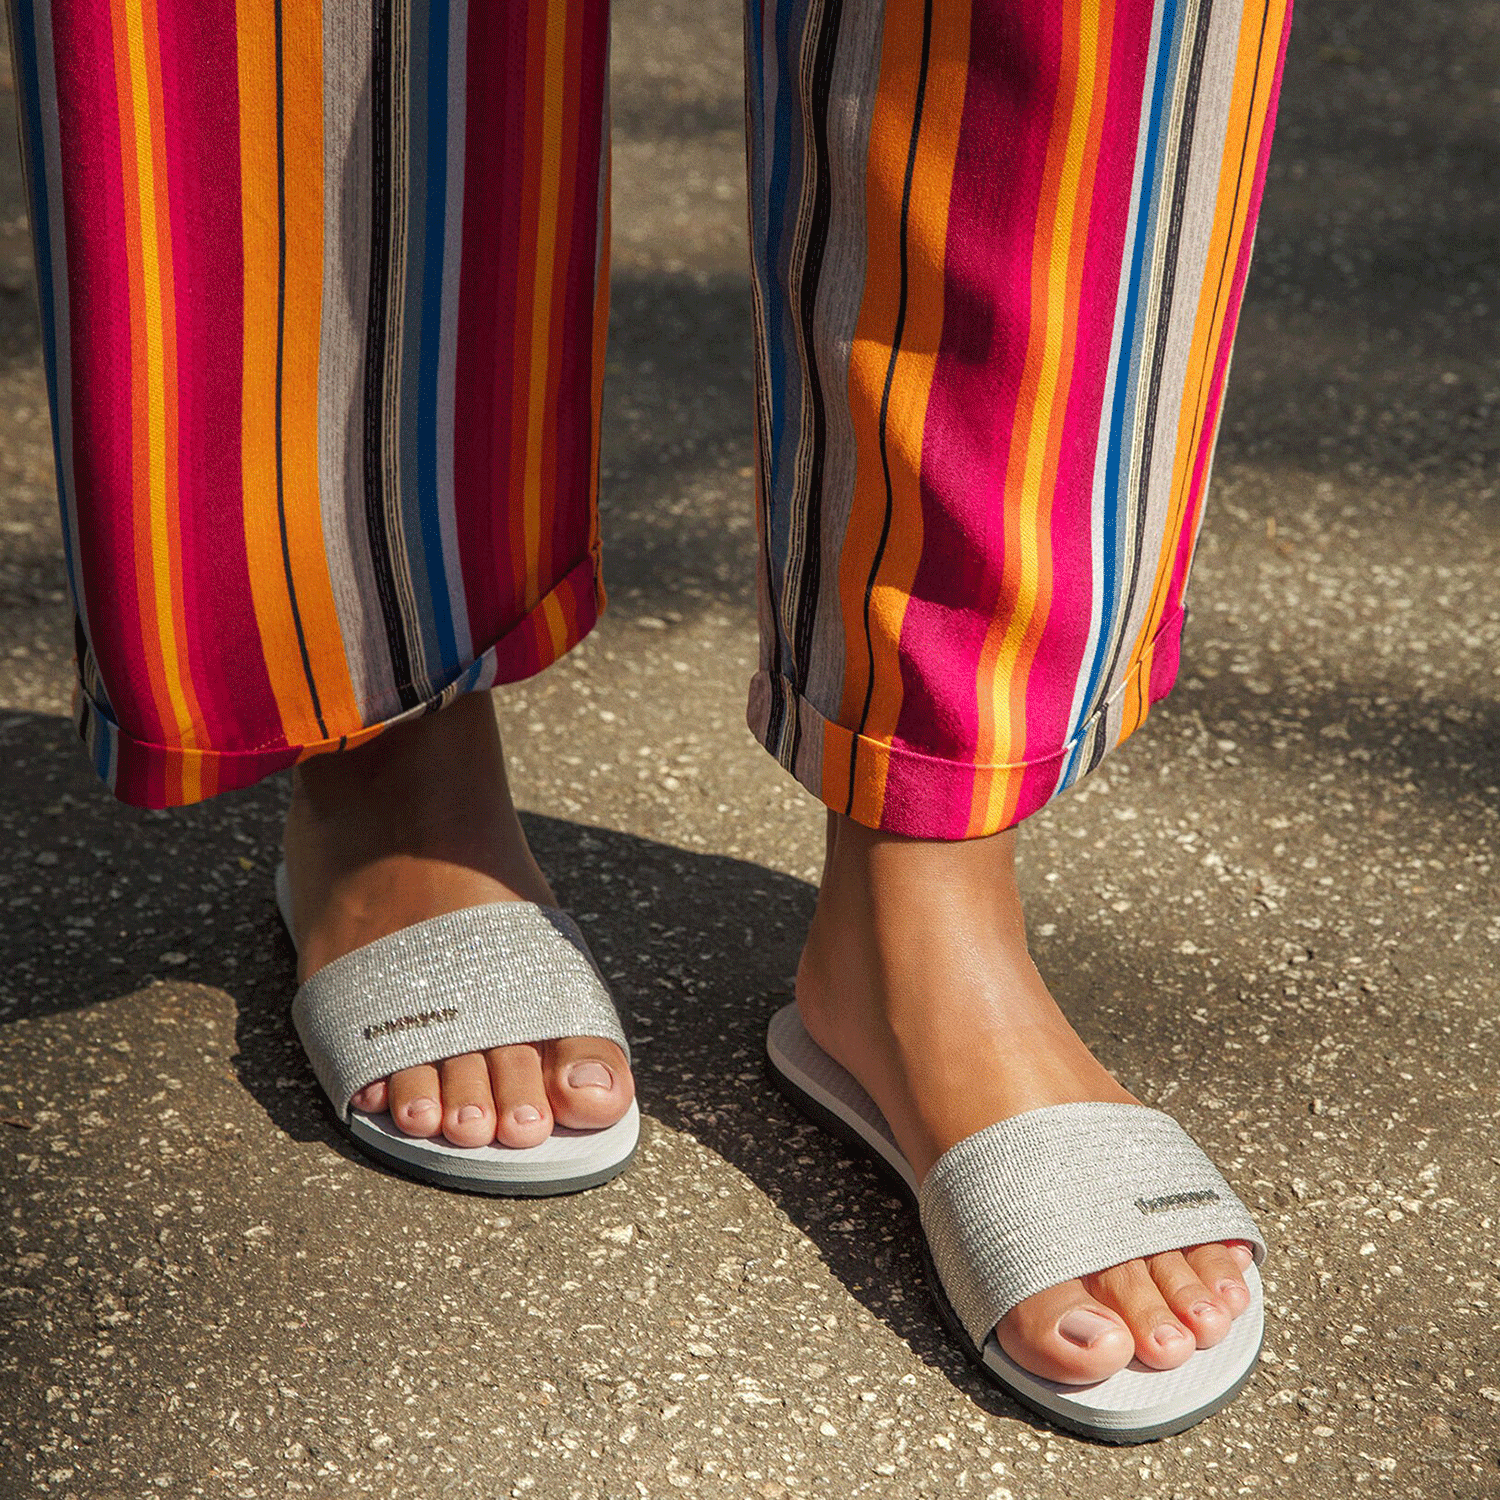 4 Reasons The Havaianas Malta is the Cult Sandal of the Summer